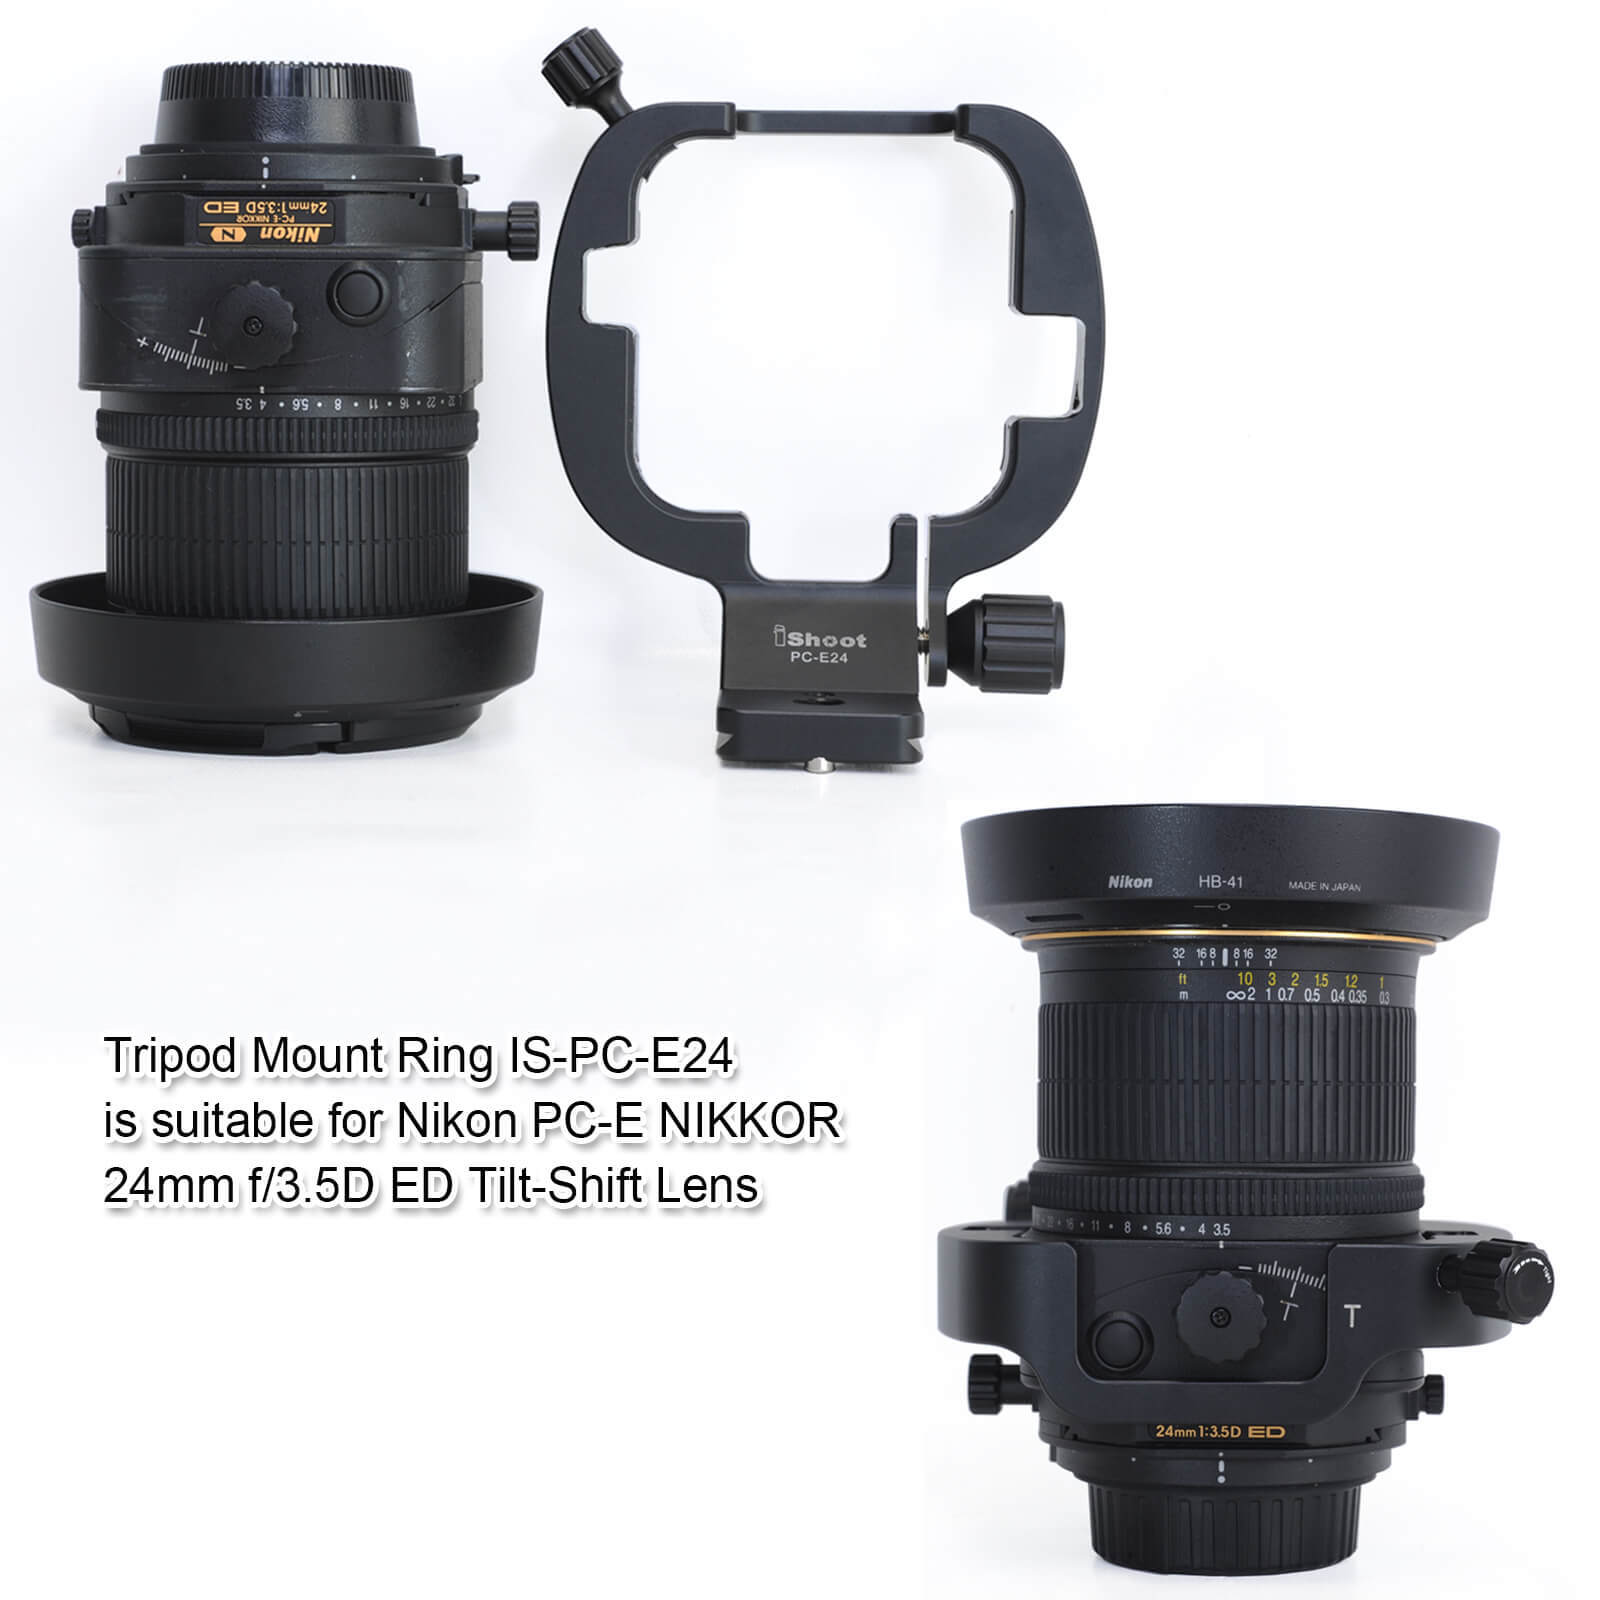 Tripod Mount Ring Lens Collar for Nikon PC-E FX Micro-NIKKOR 45mm f/2.8D ED and 24mm f/3.5D ED Tilt-Shift Lens Aviation Aluminum Camera Lens Support with Quick Release Plate for ARCA Tripod Ball Head 